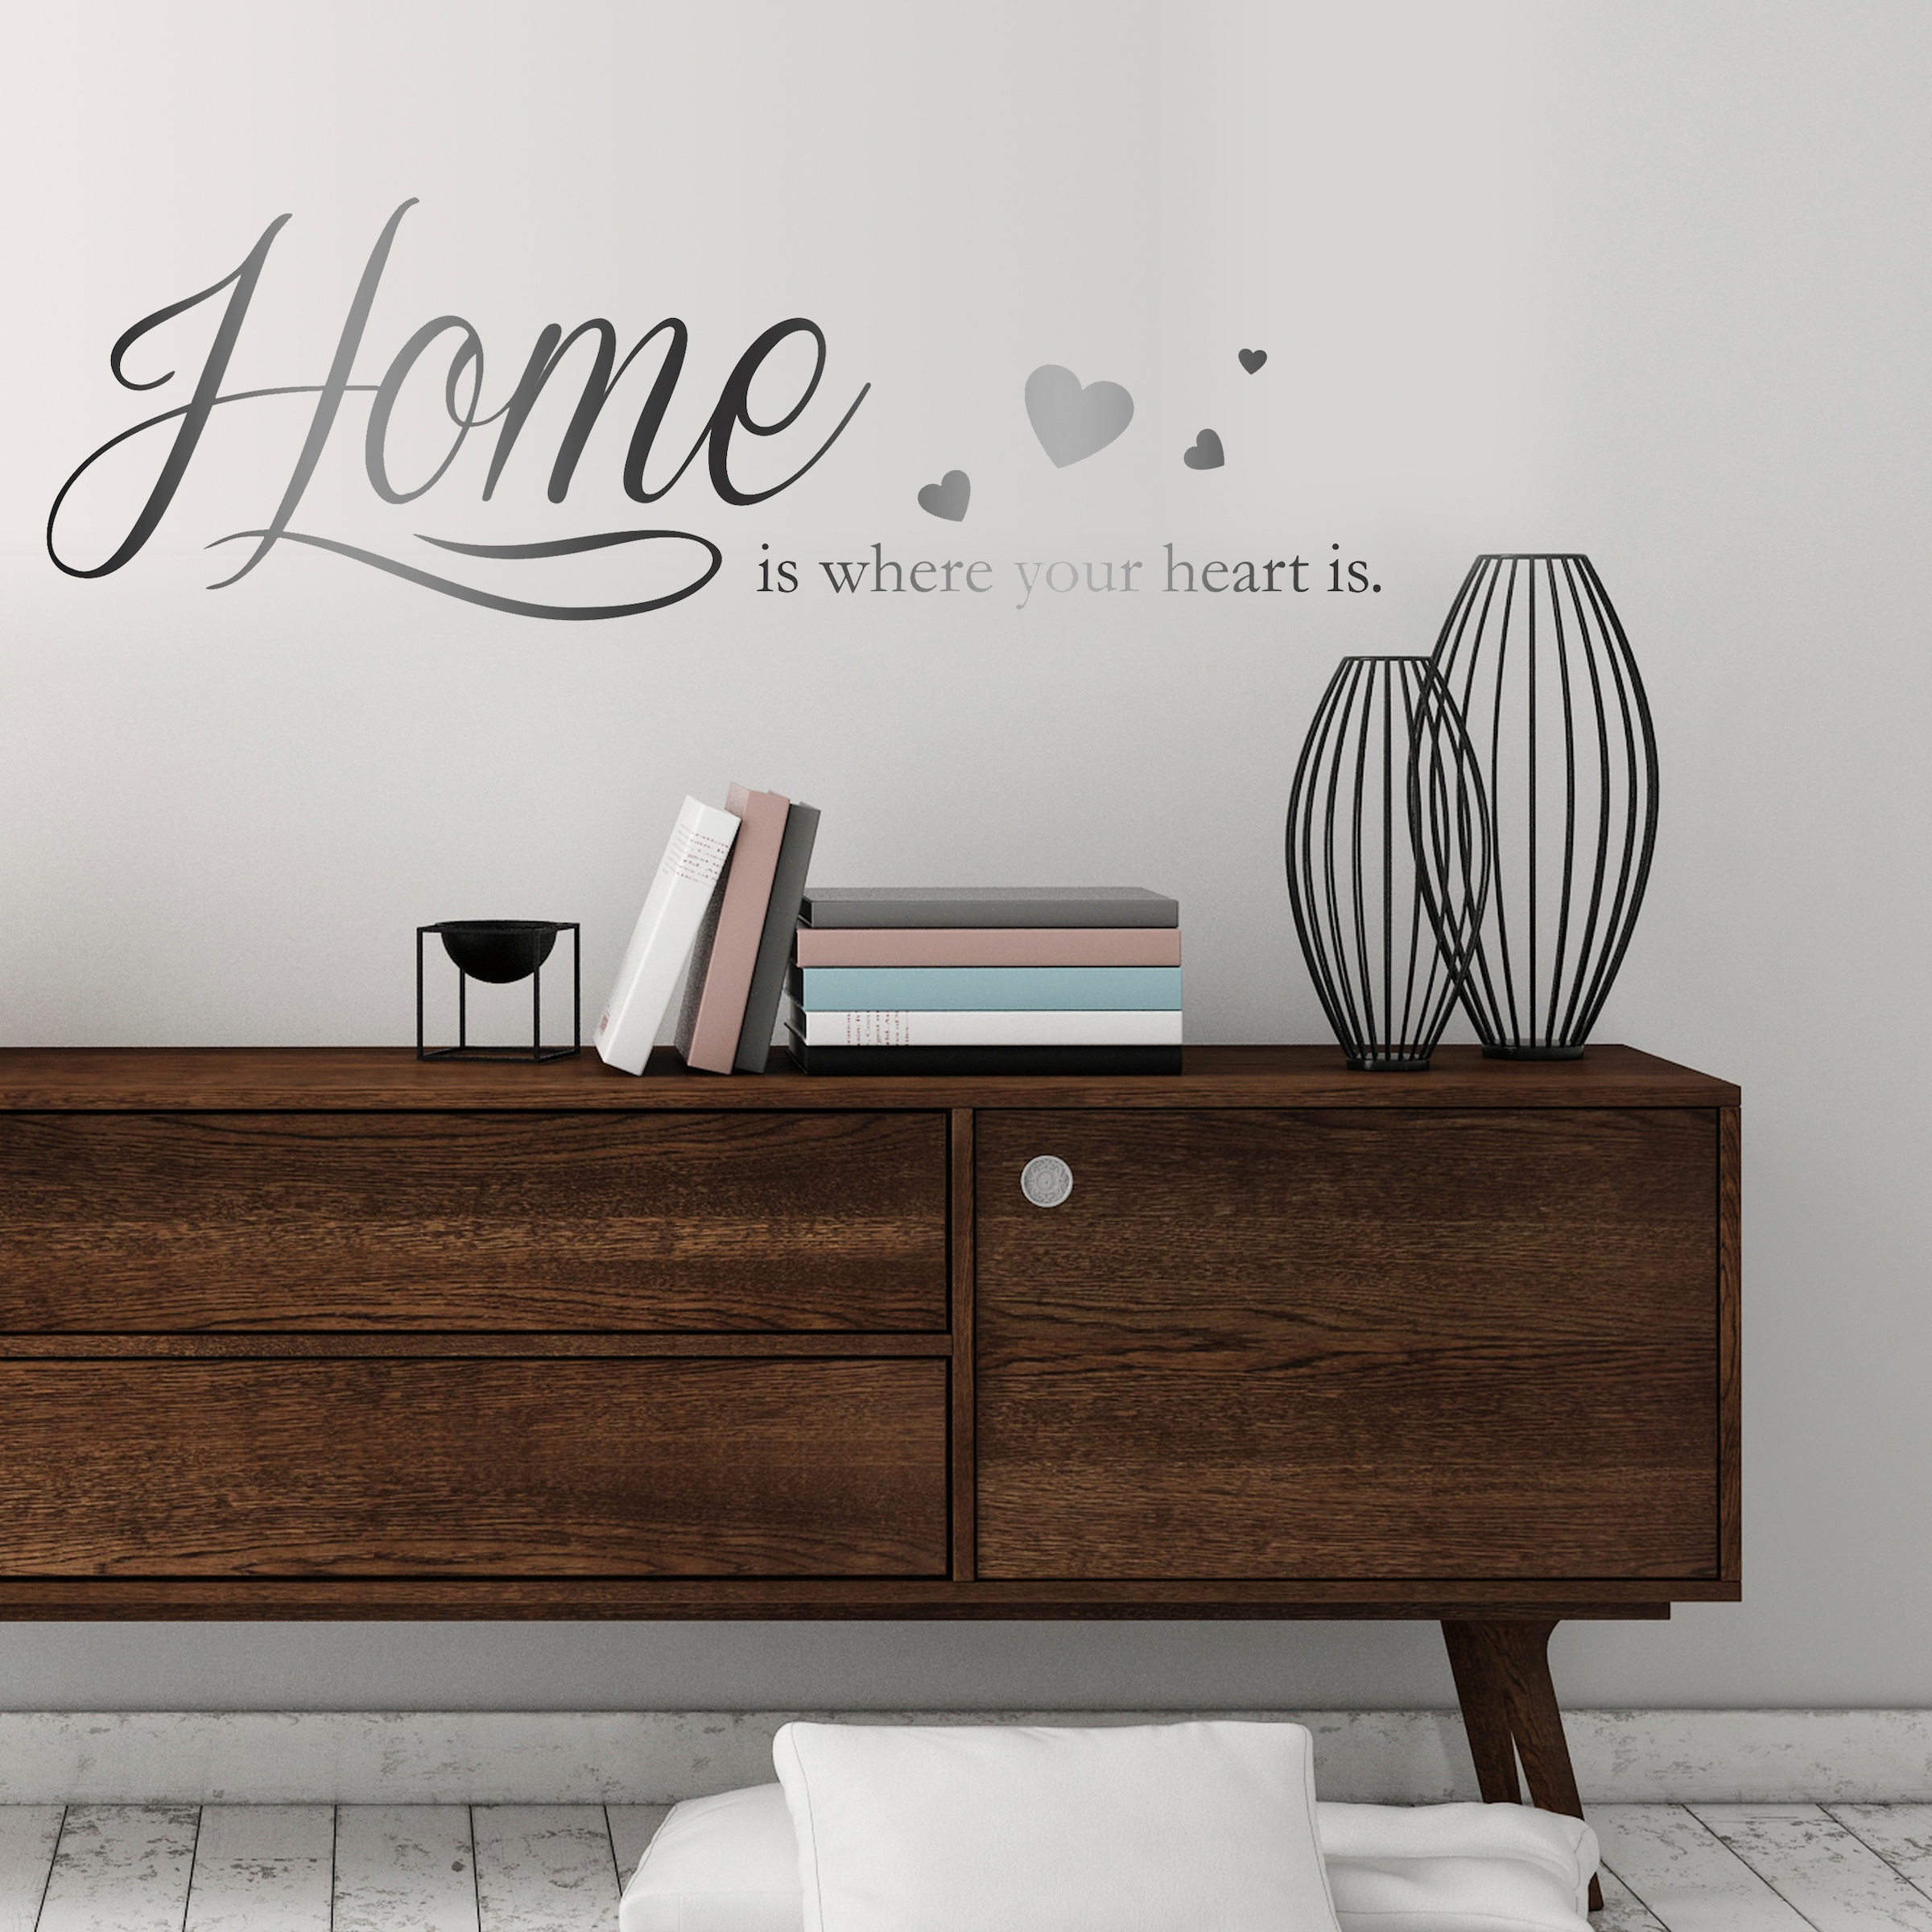 kaufen x Wandtattoo 30 where 120 is«, BAUR »Home cm | is heart your queence